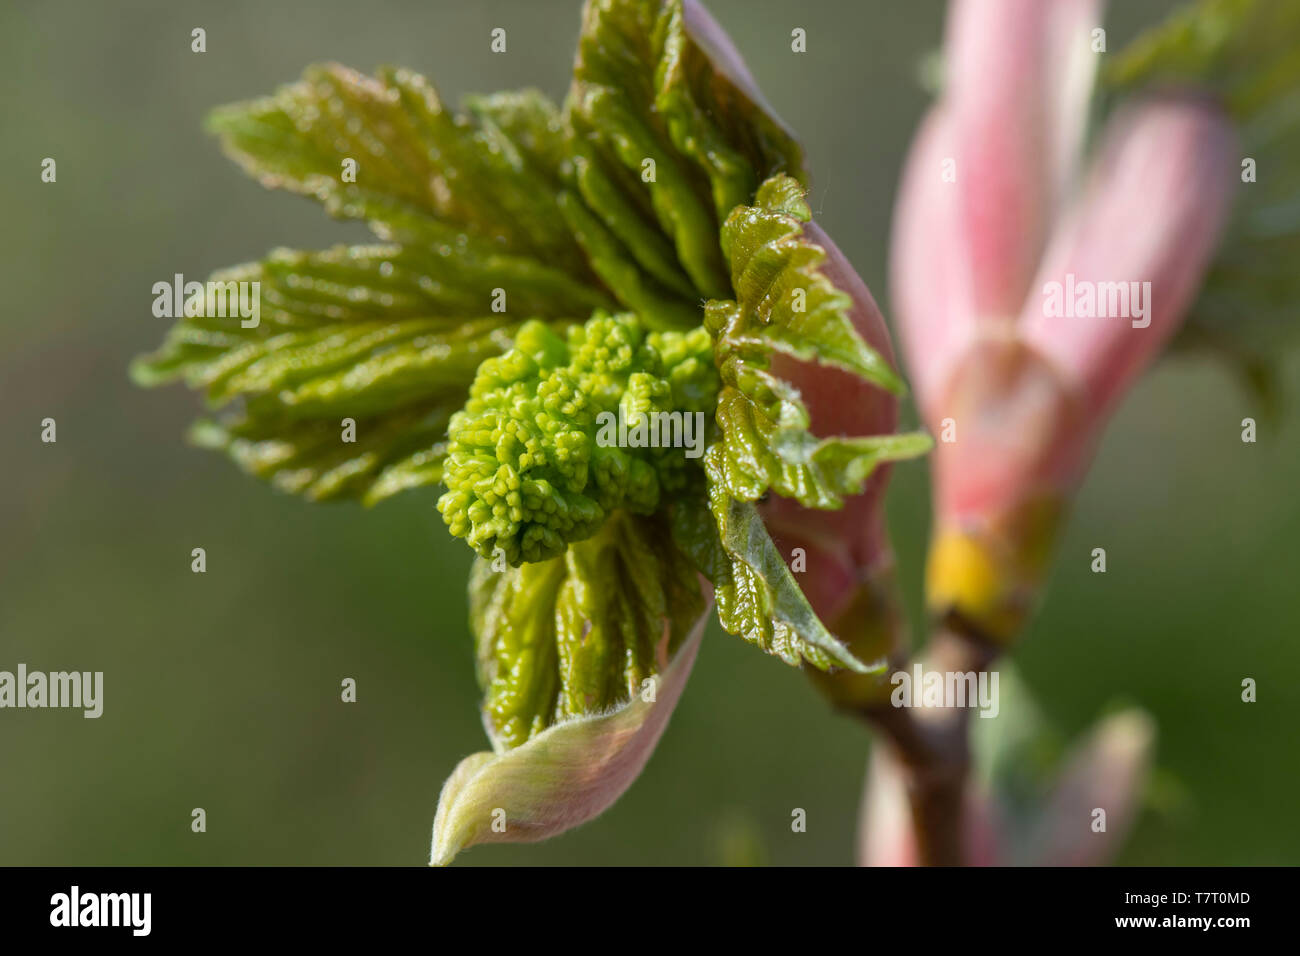 Newly Formed Flowers and Leaves Emerging From the Buds on a Sycamore (Acer Pseudoplatanus). Stock Photo